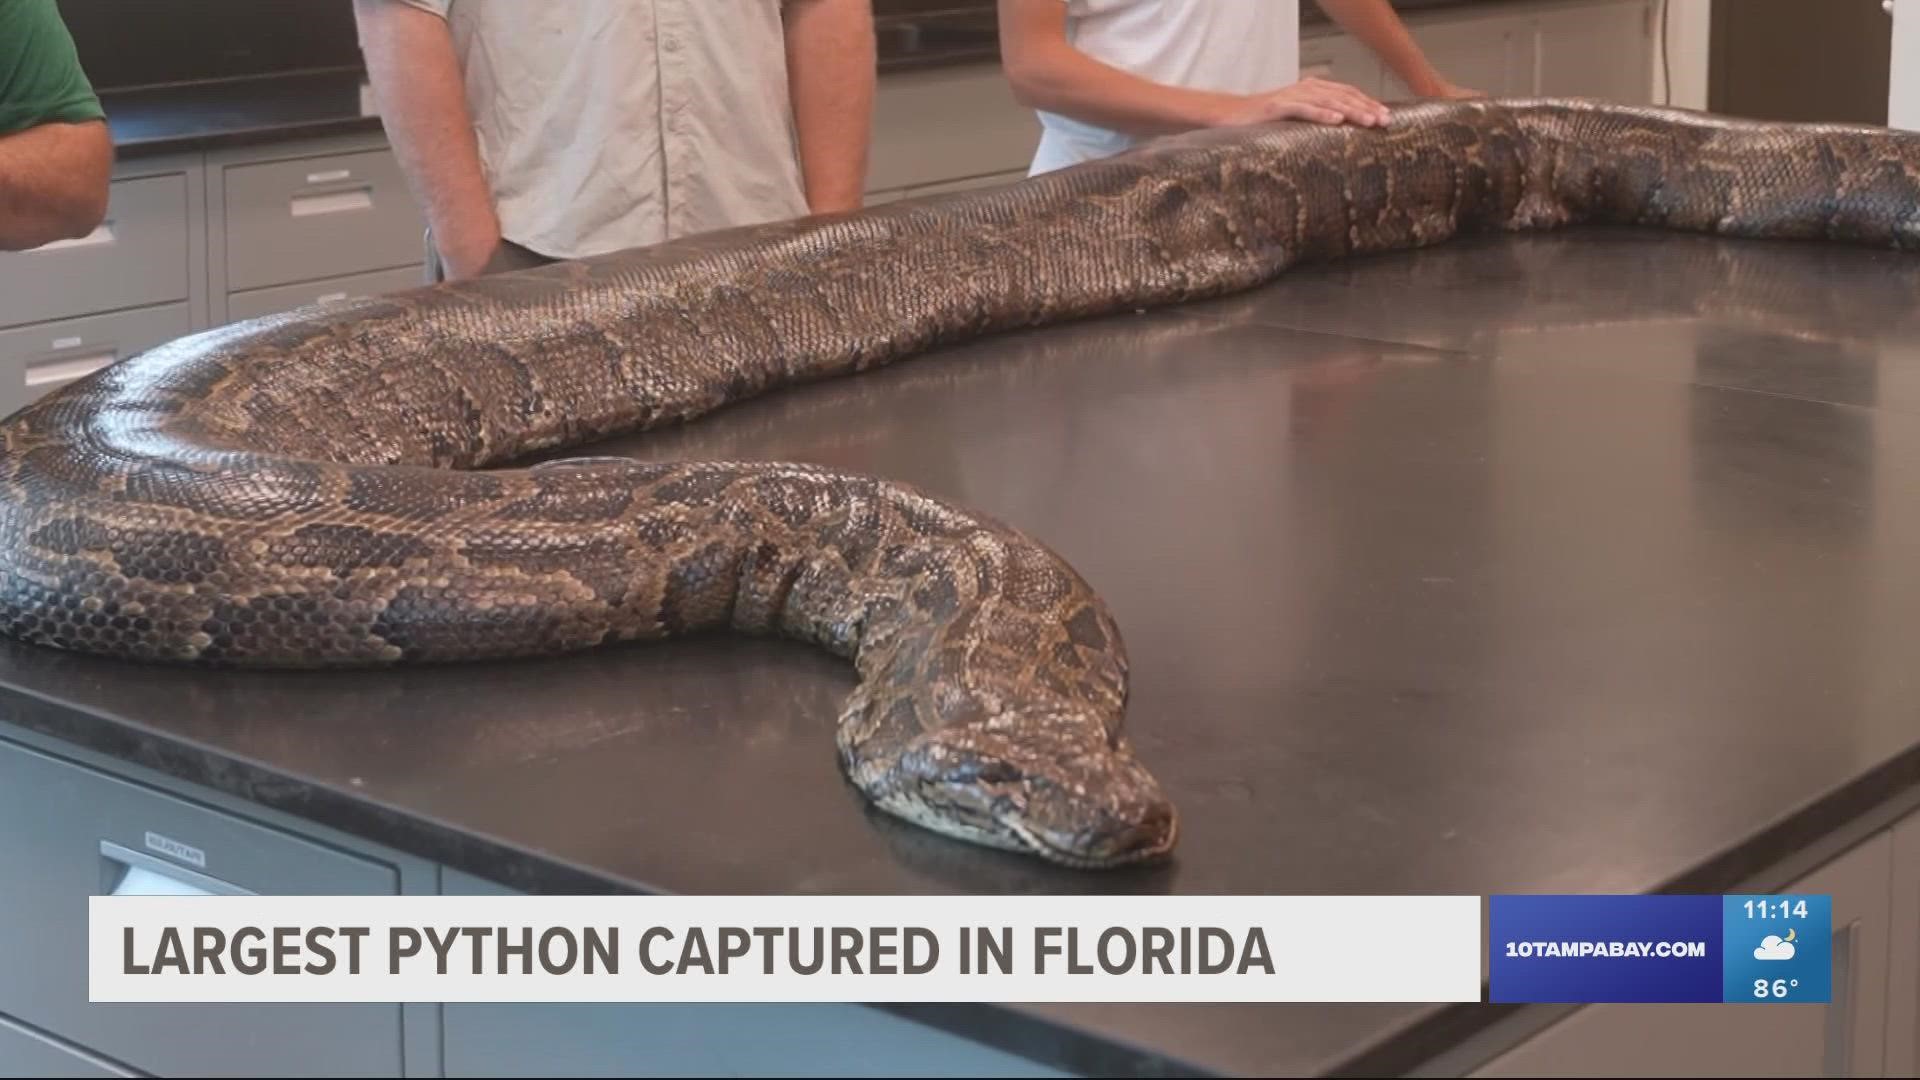 The python weighed 215 pounds and upon dissection, discovered 122 eggs inside.